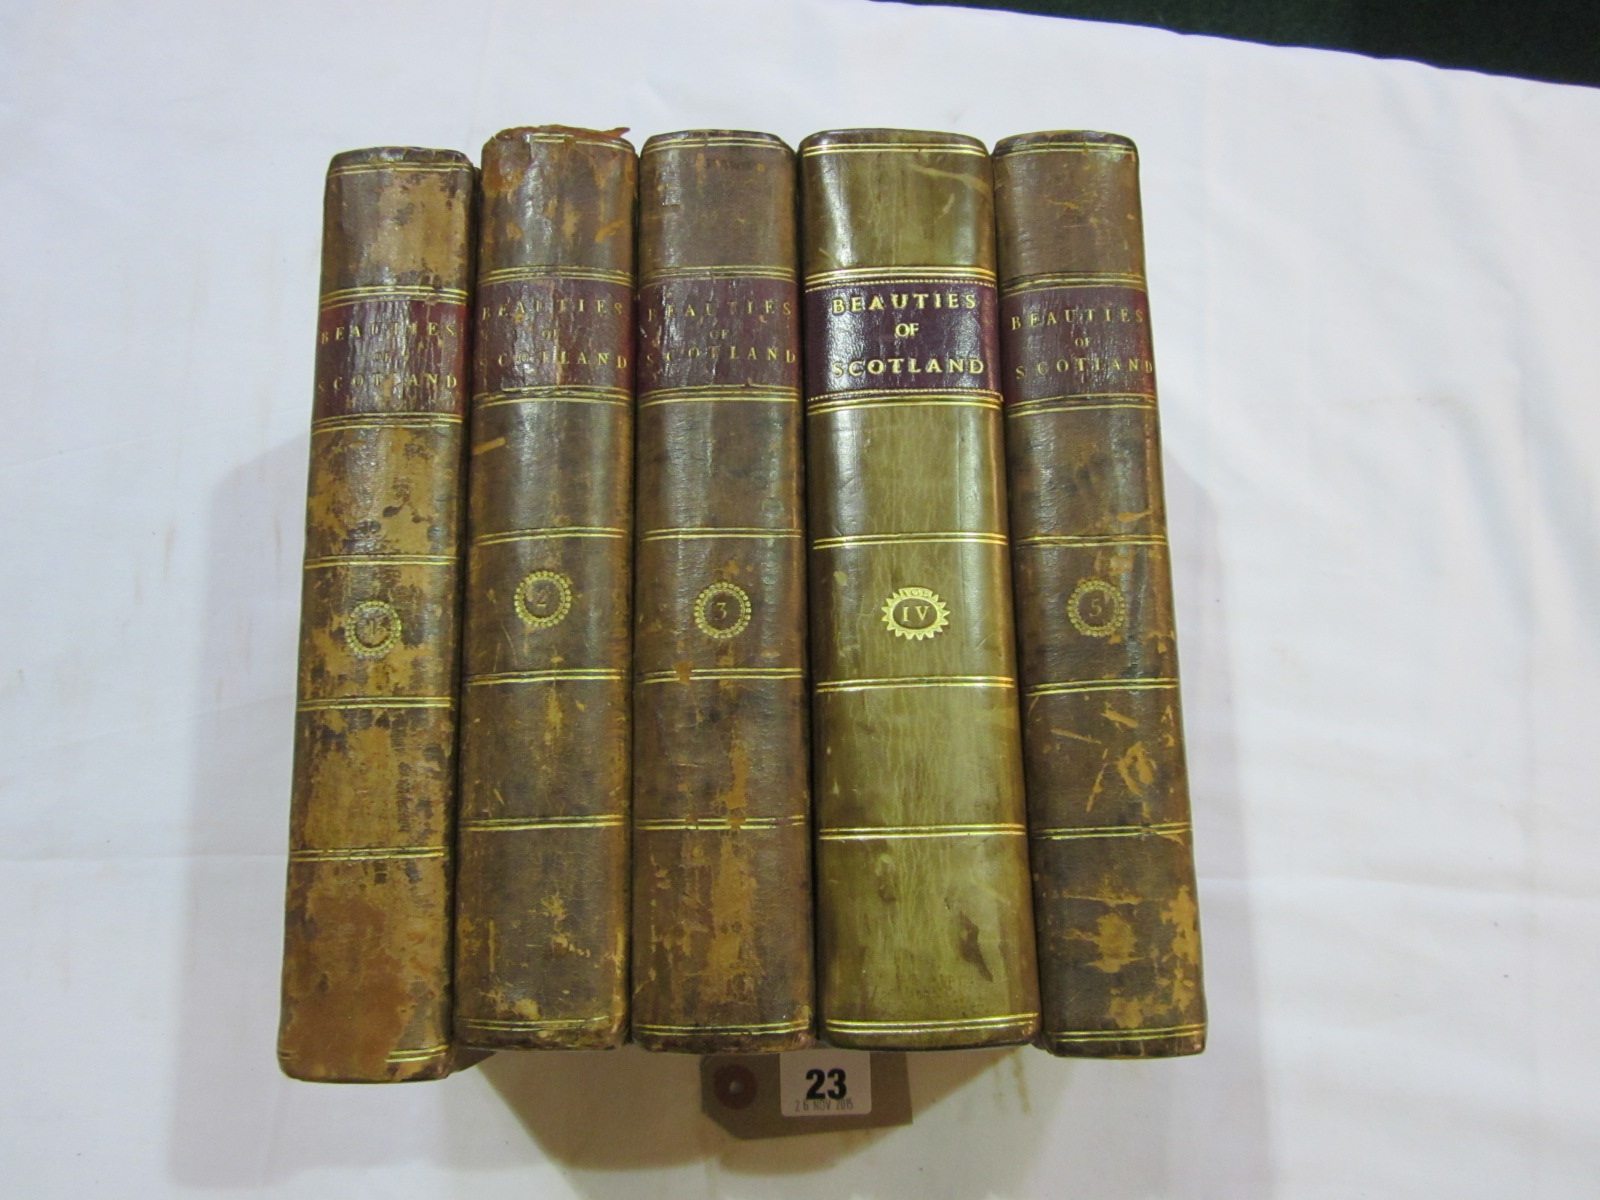 VERNOR & HOOD (Pubs).  The Beauties of Scotland. 5 vols. Many eng. topographical plates.